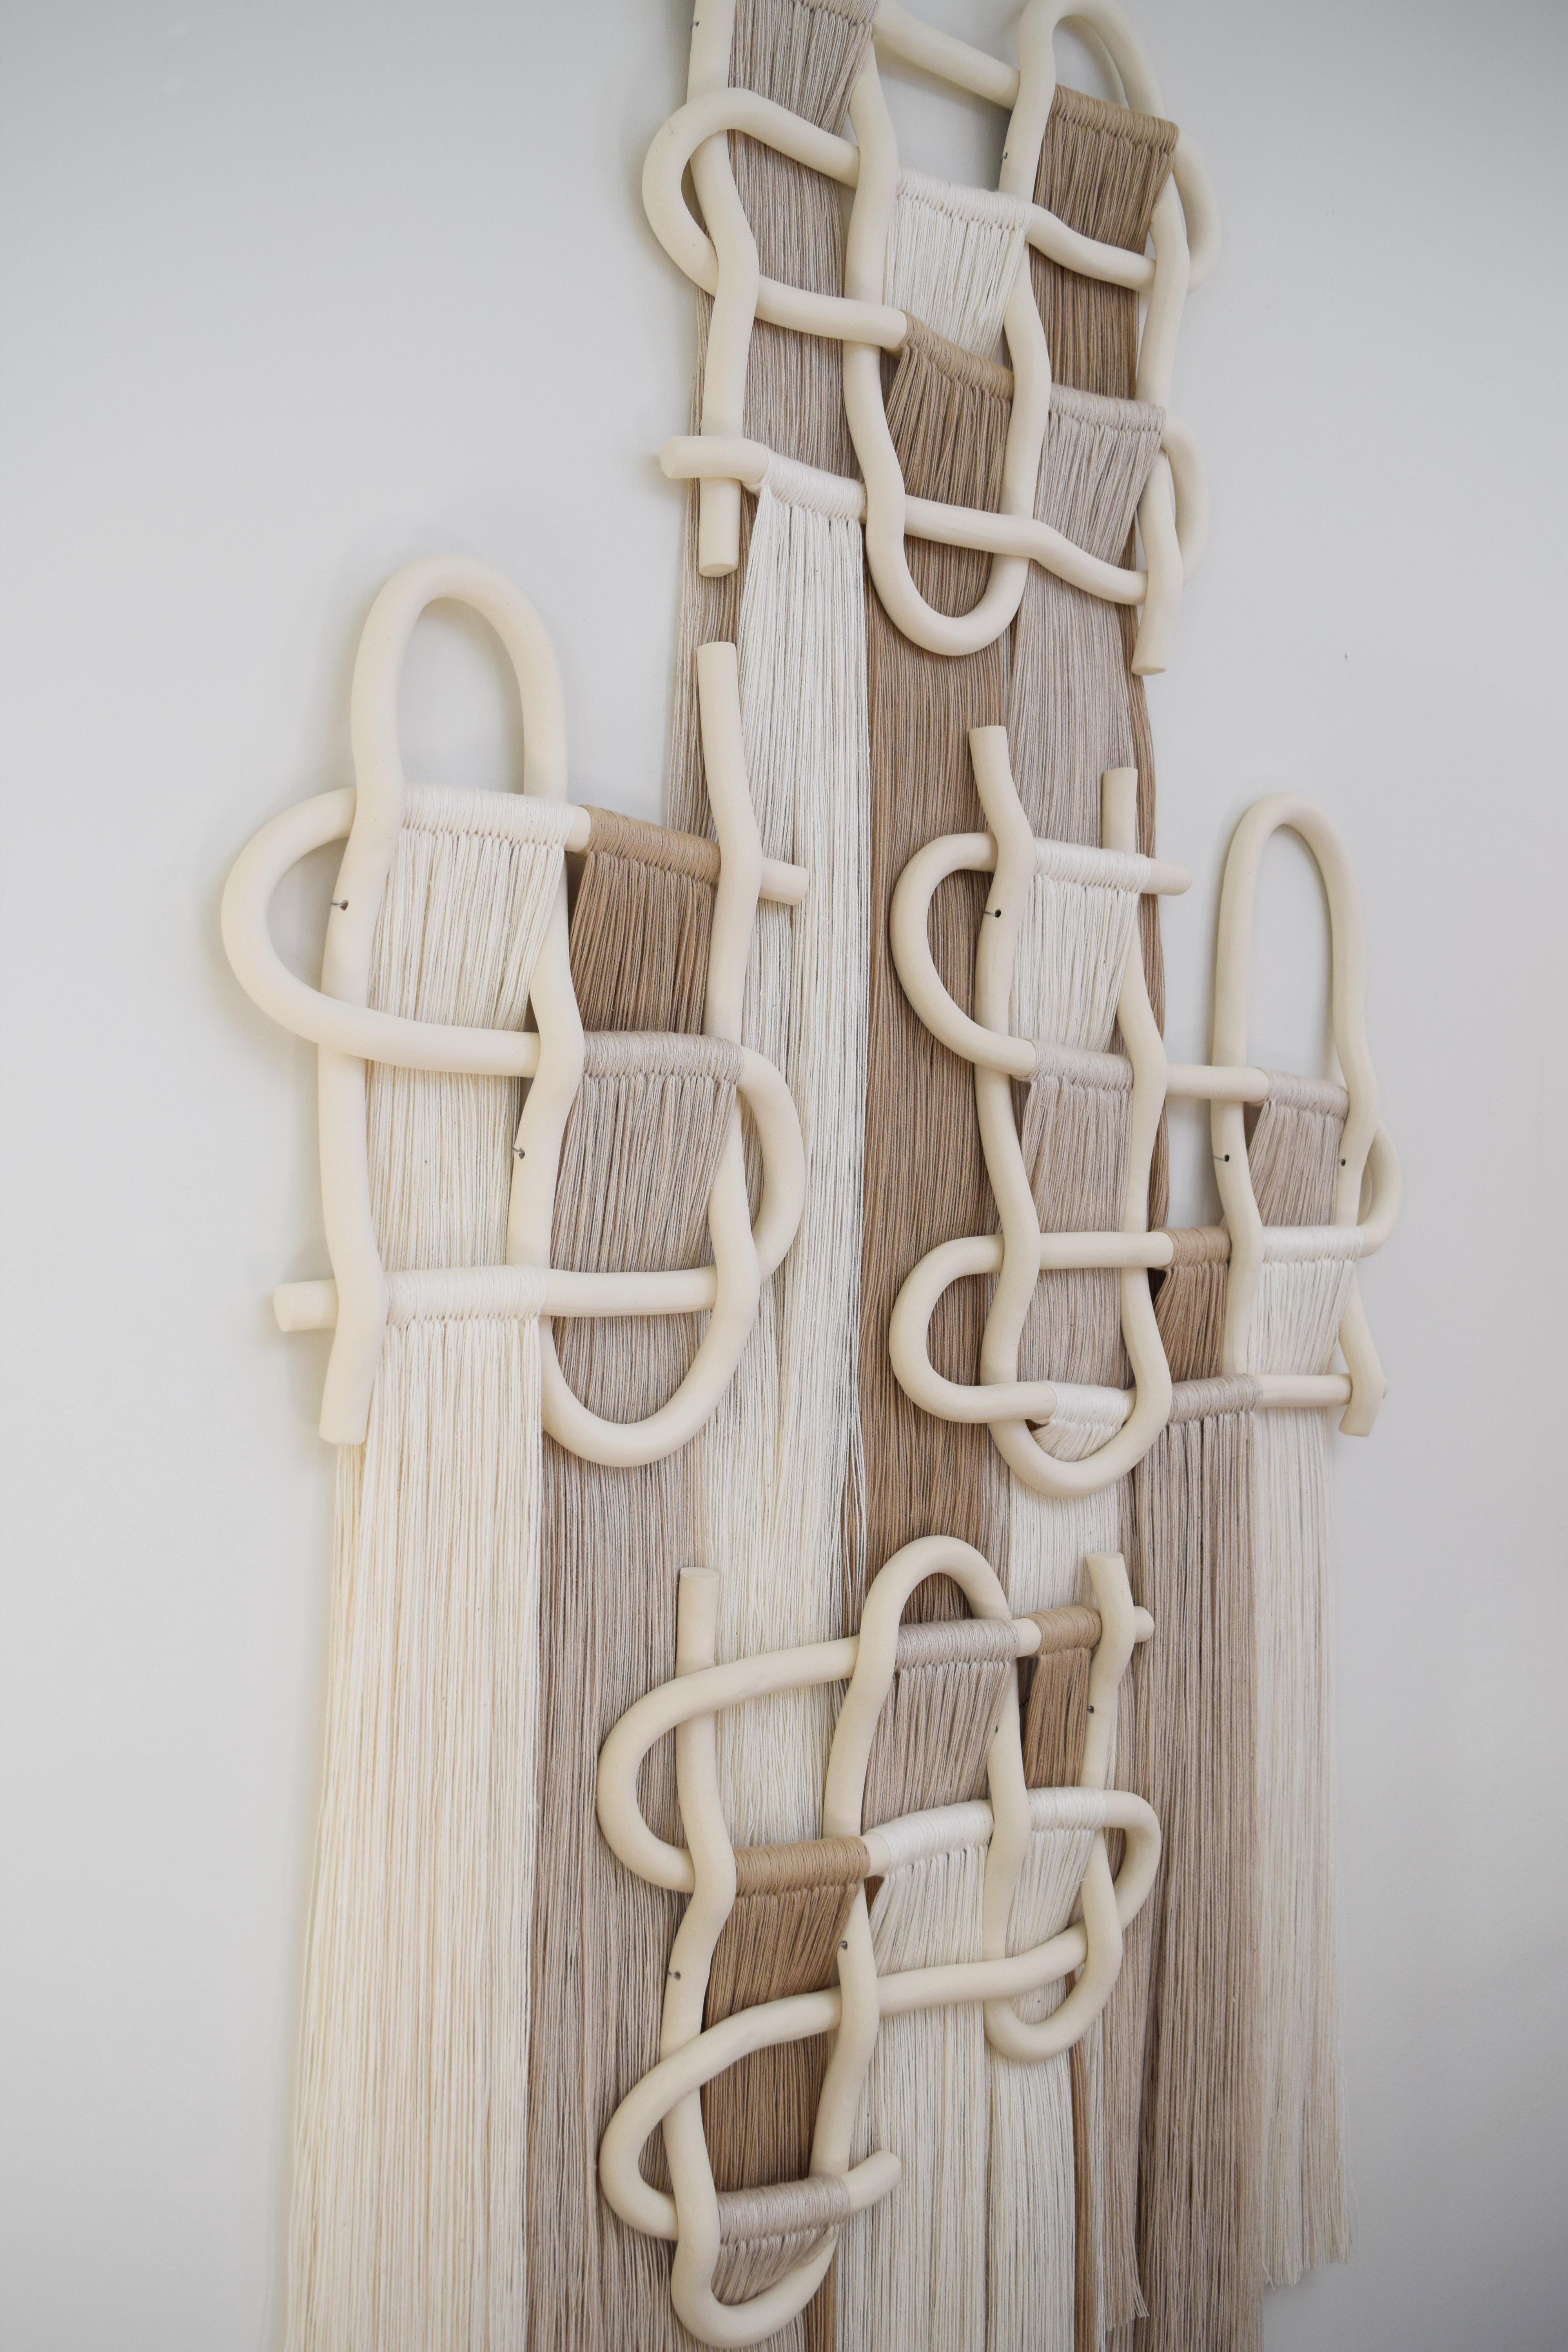 This item is in stock and ready to ship.

Four panel wall sculpture. Hand formed ceramic pieces in unglazed white stoneware with cotton fringe in white, off-white, and tan. Hanging wire is included on each panel. Ships with a small comb for fringe